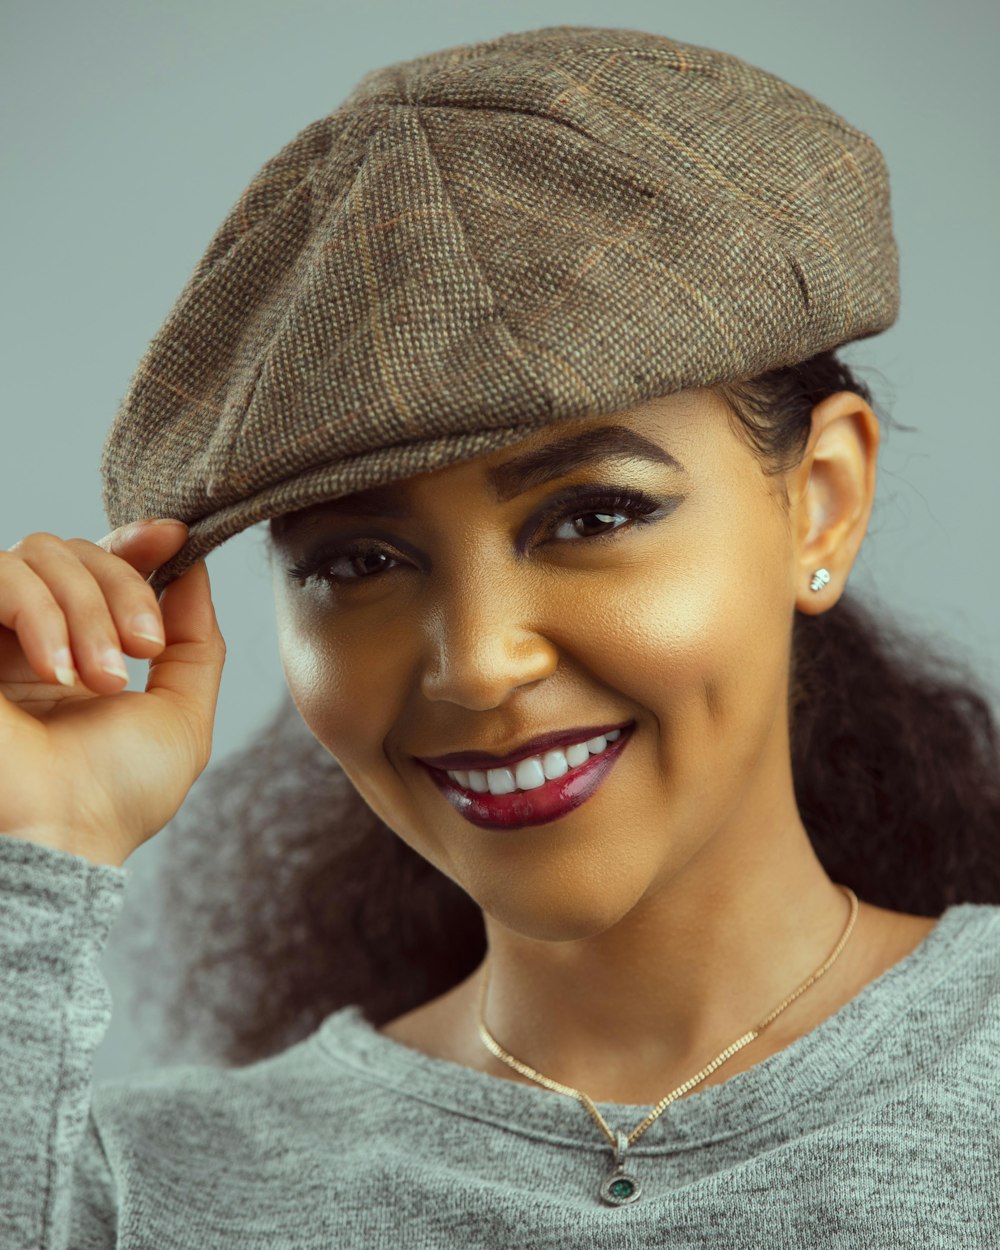 a woman wearing a hat and smiling for the camera